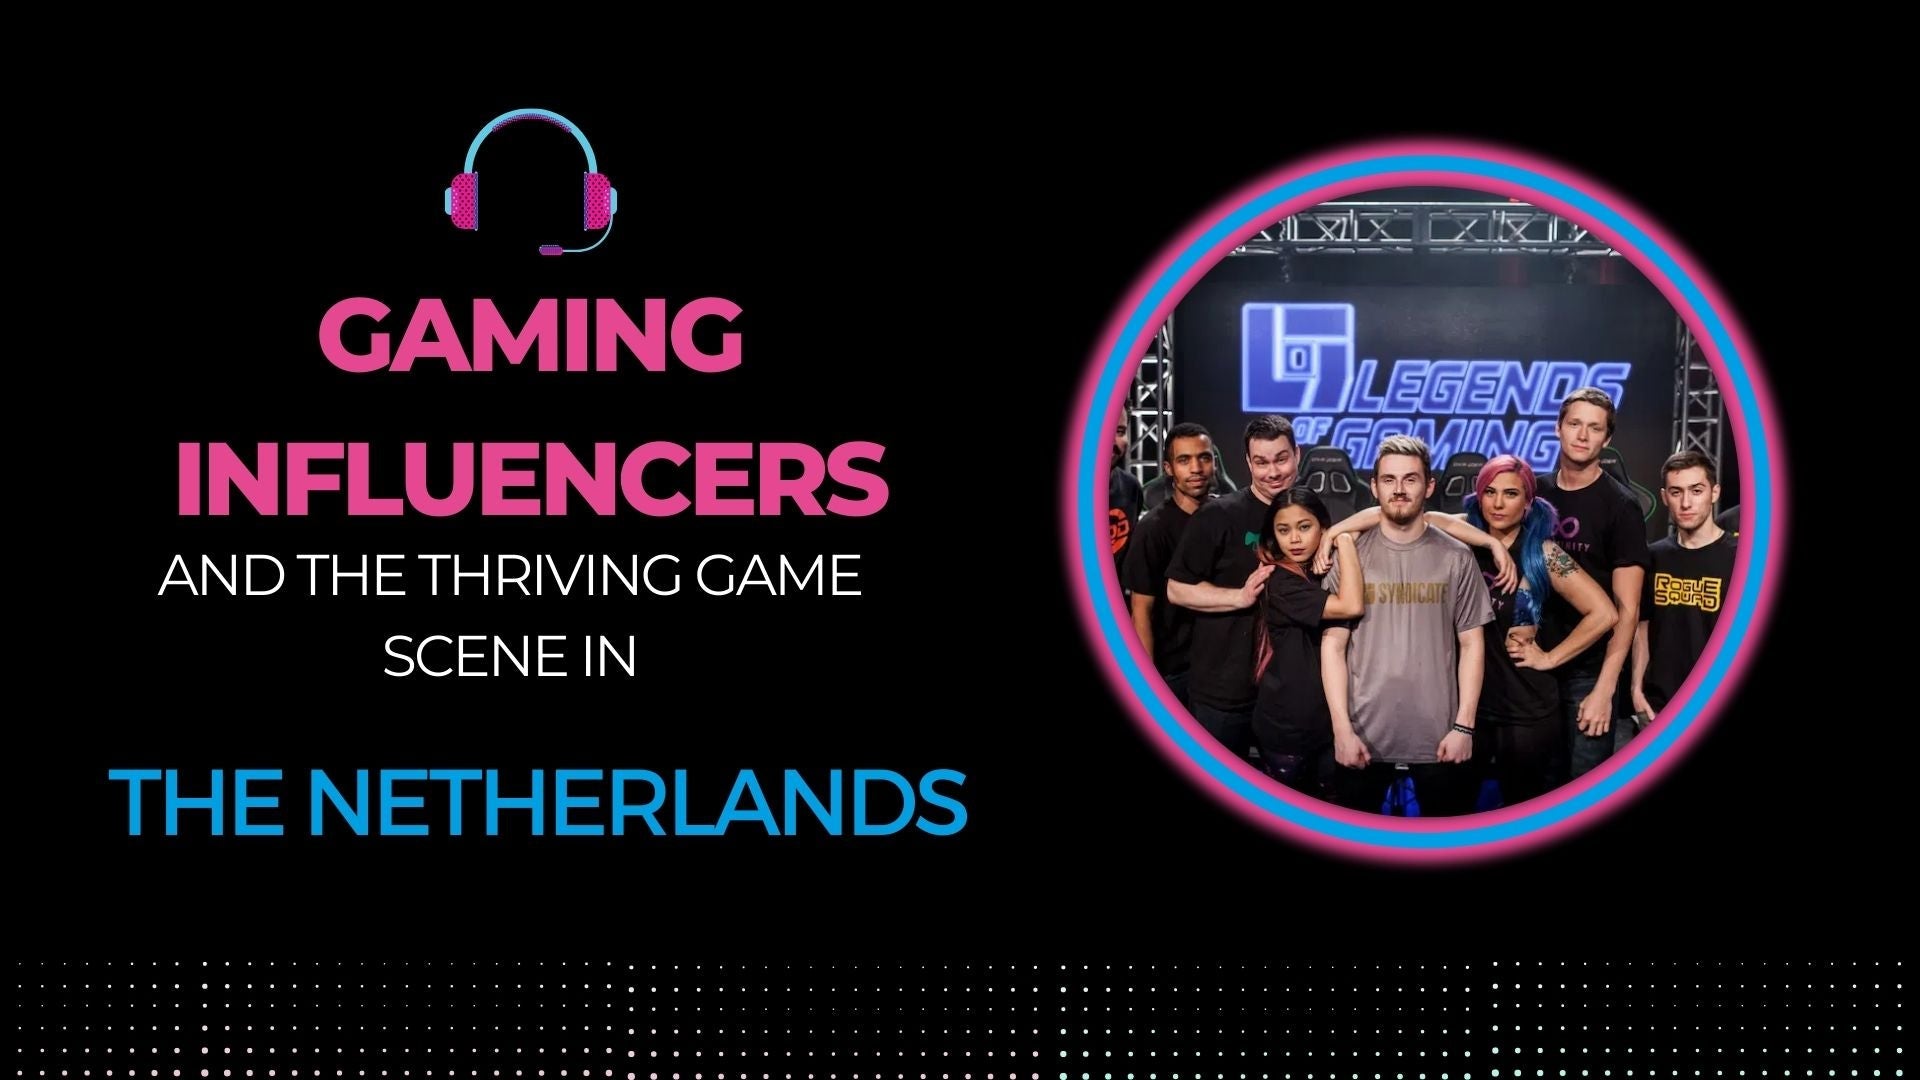 Gaming Influencers and the Thriving Game Scene in the Netherlands - Gamestate